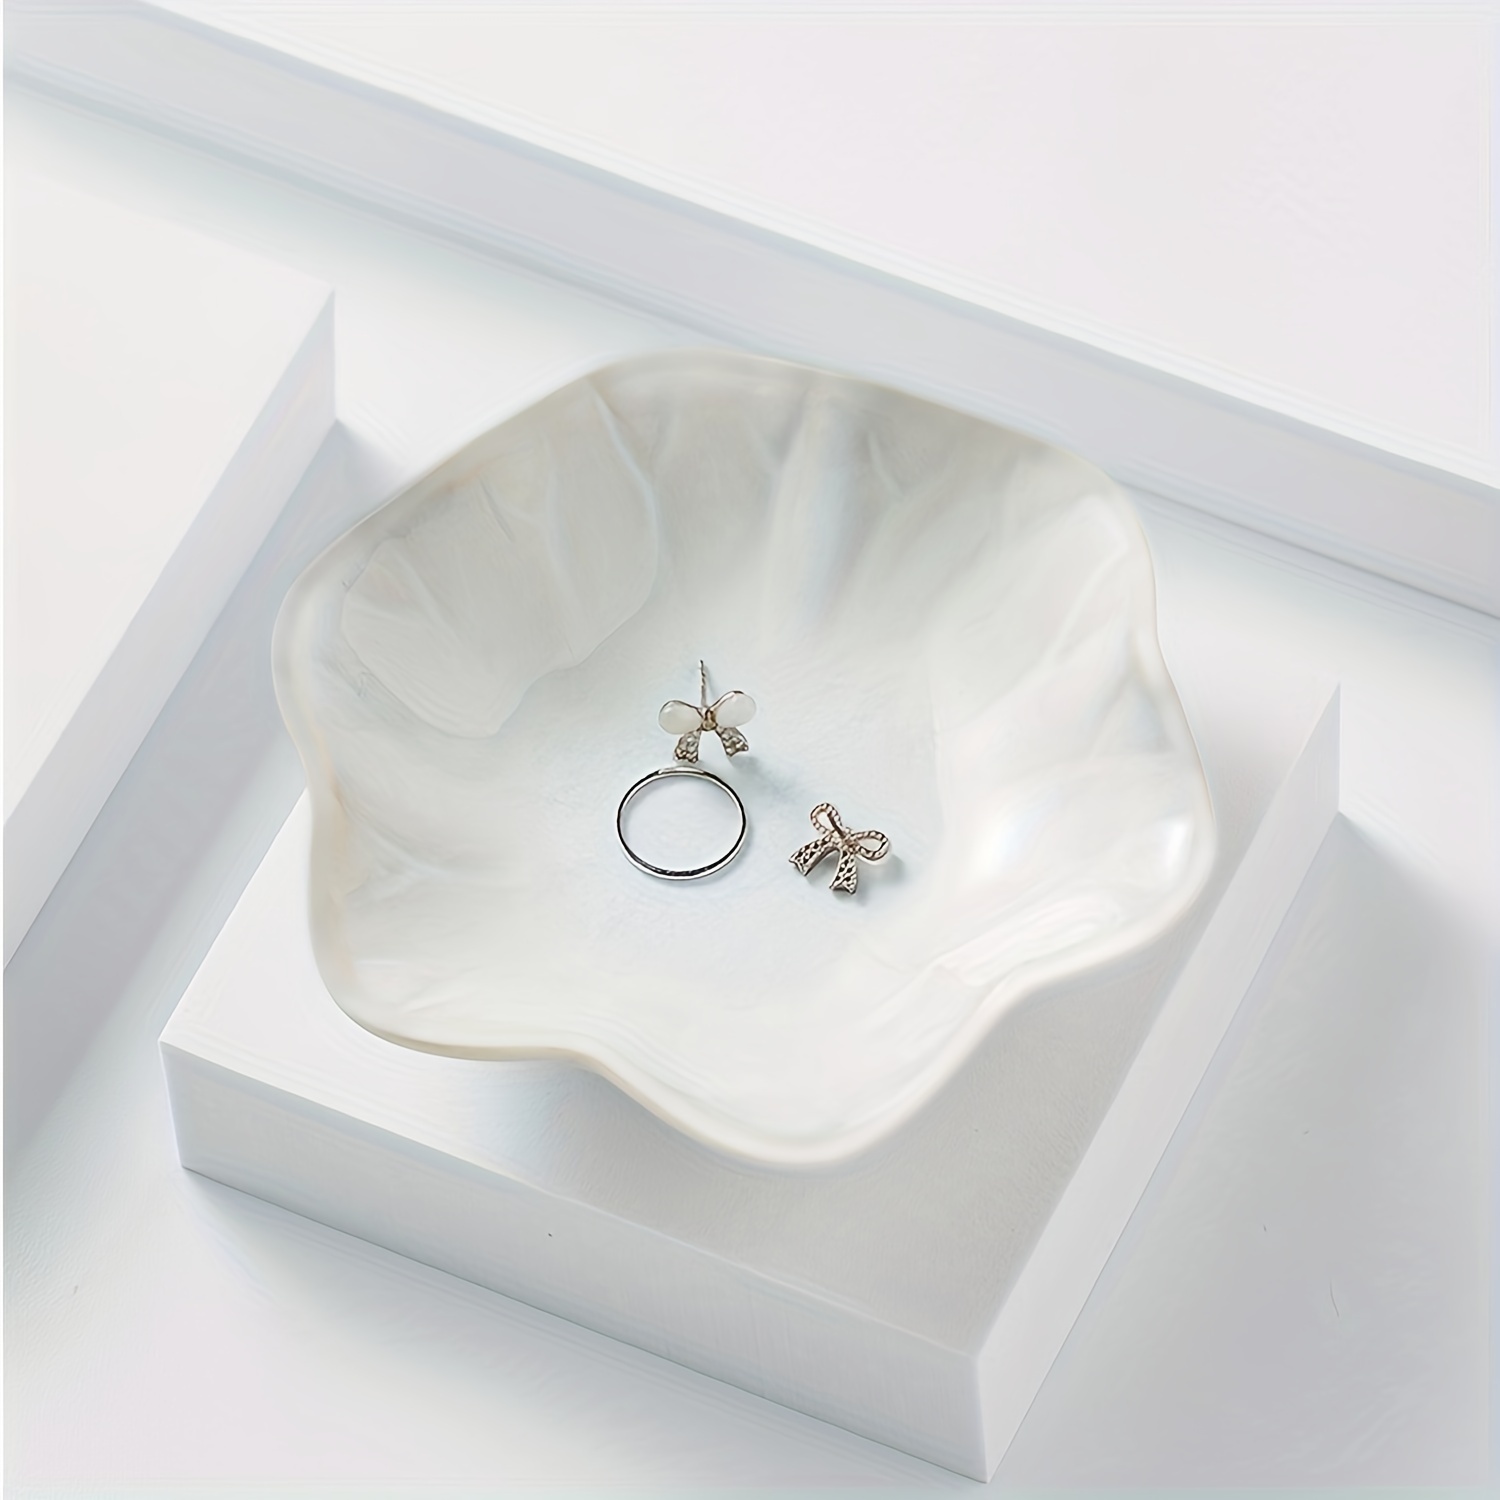 

1pc Jewelry Plate, Lotus Leaf Shape Ring Holder Dish, Small Key Bowl, Ceramic Jewelry Dish Organizing Necklace Earrings For Mom Friend Sister (only Plate)